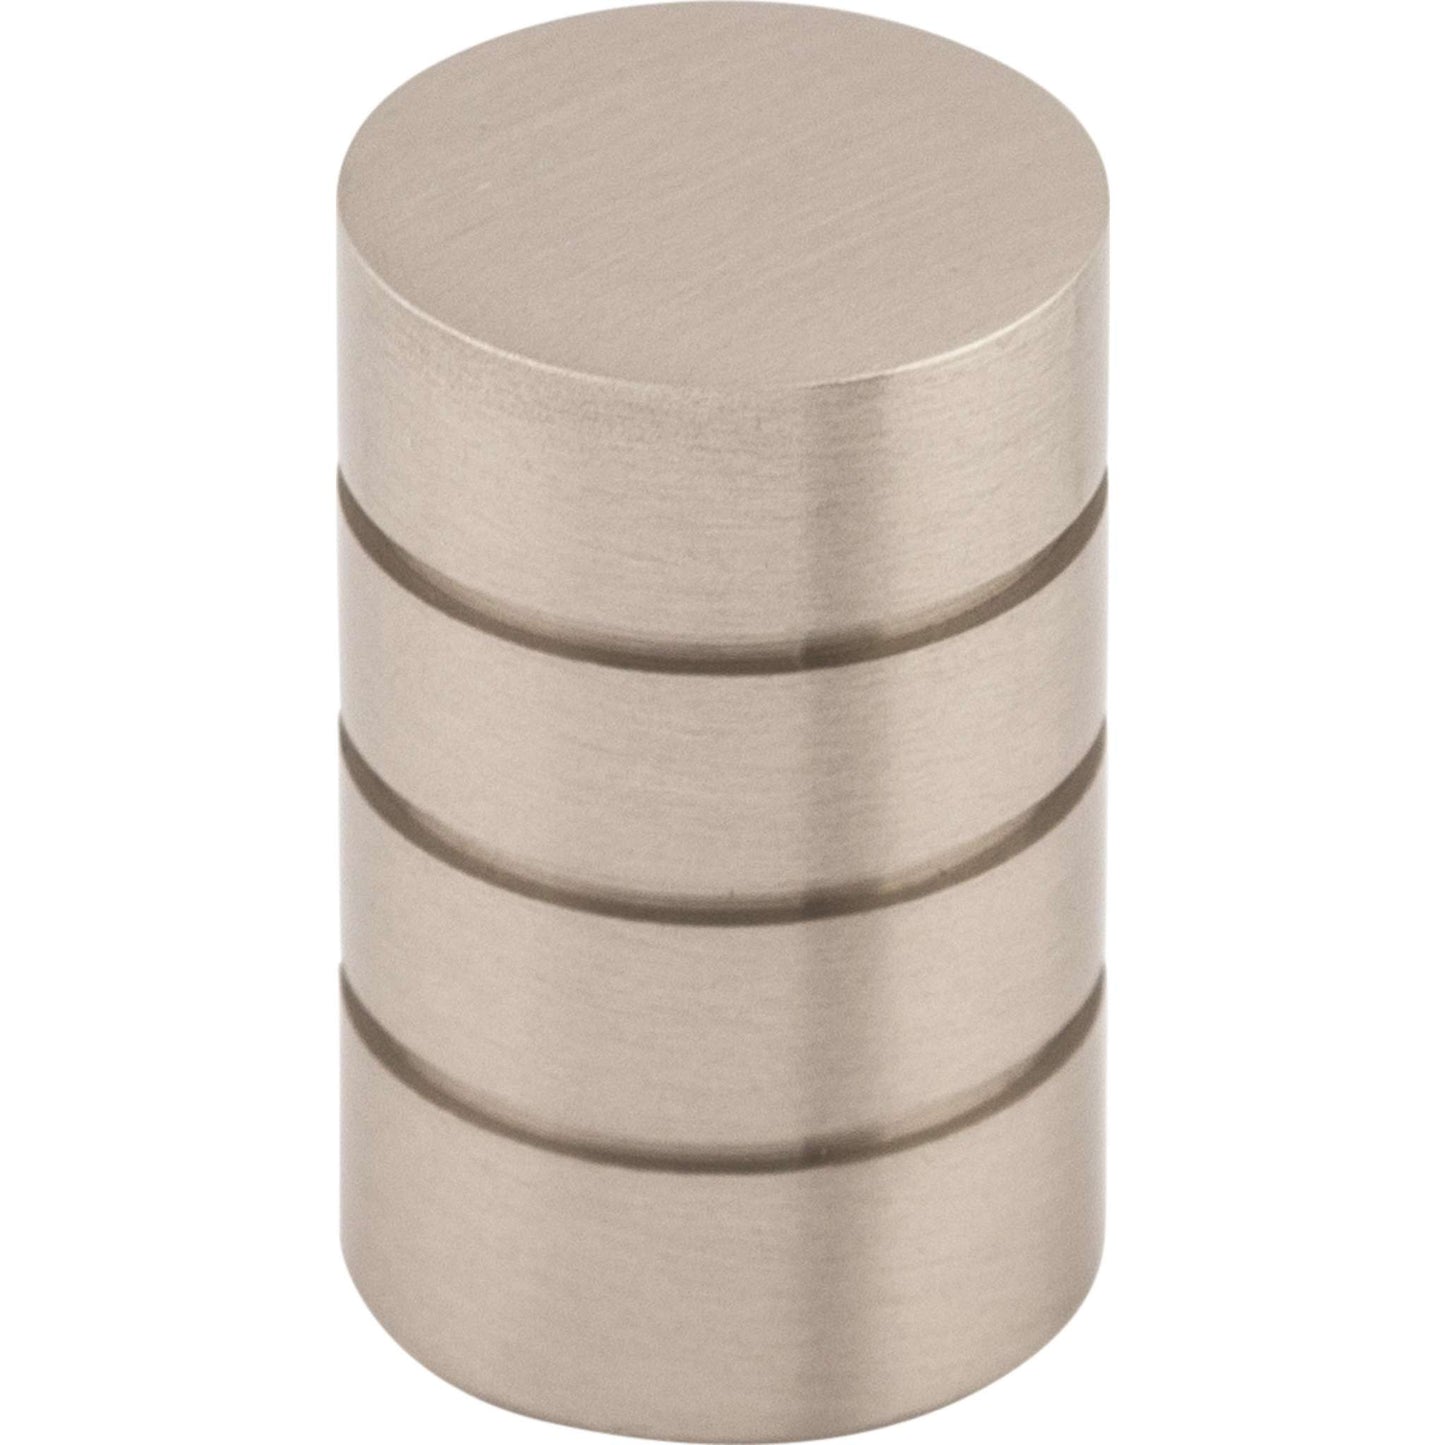 Top Knobs - Stacked Knob